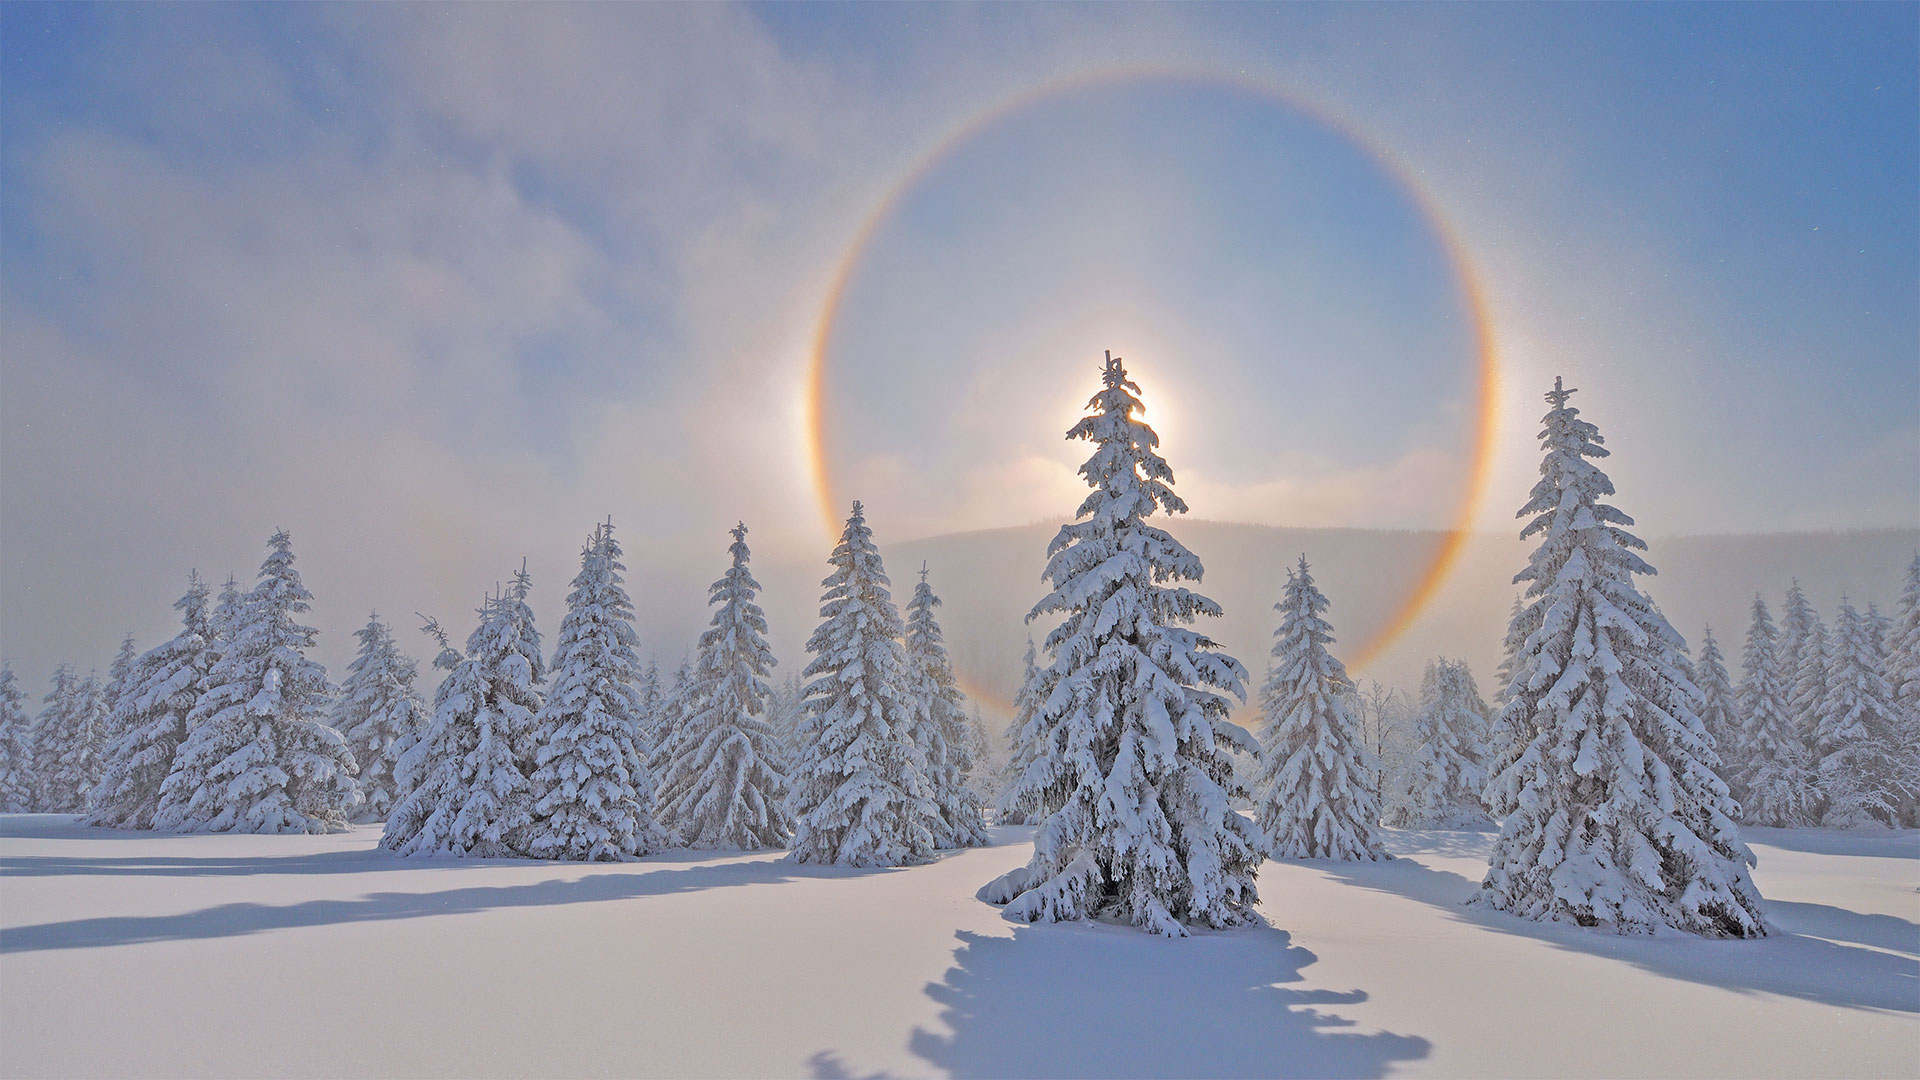 Halo around the sun in the Ore Mountains, Saxony, Germany - Martin Ruegner/Getty Images)